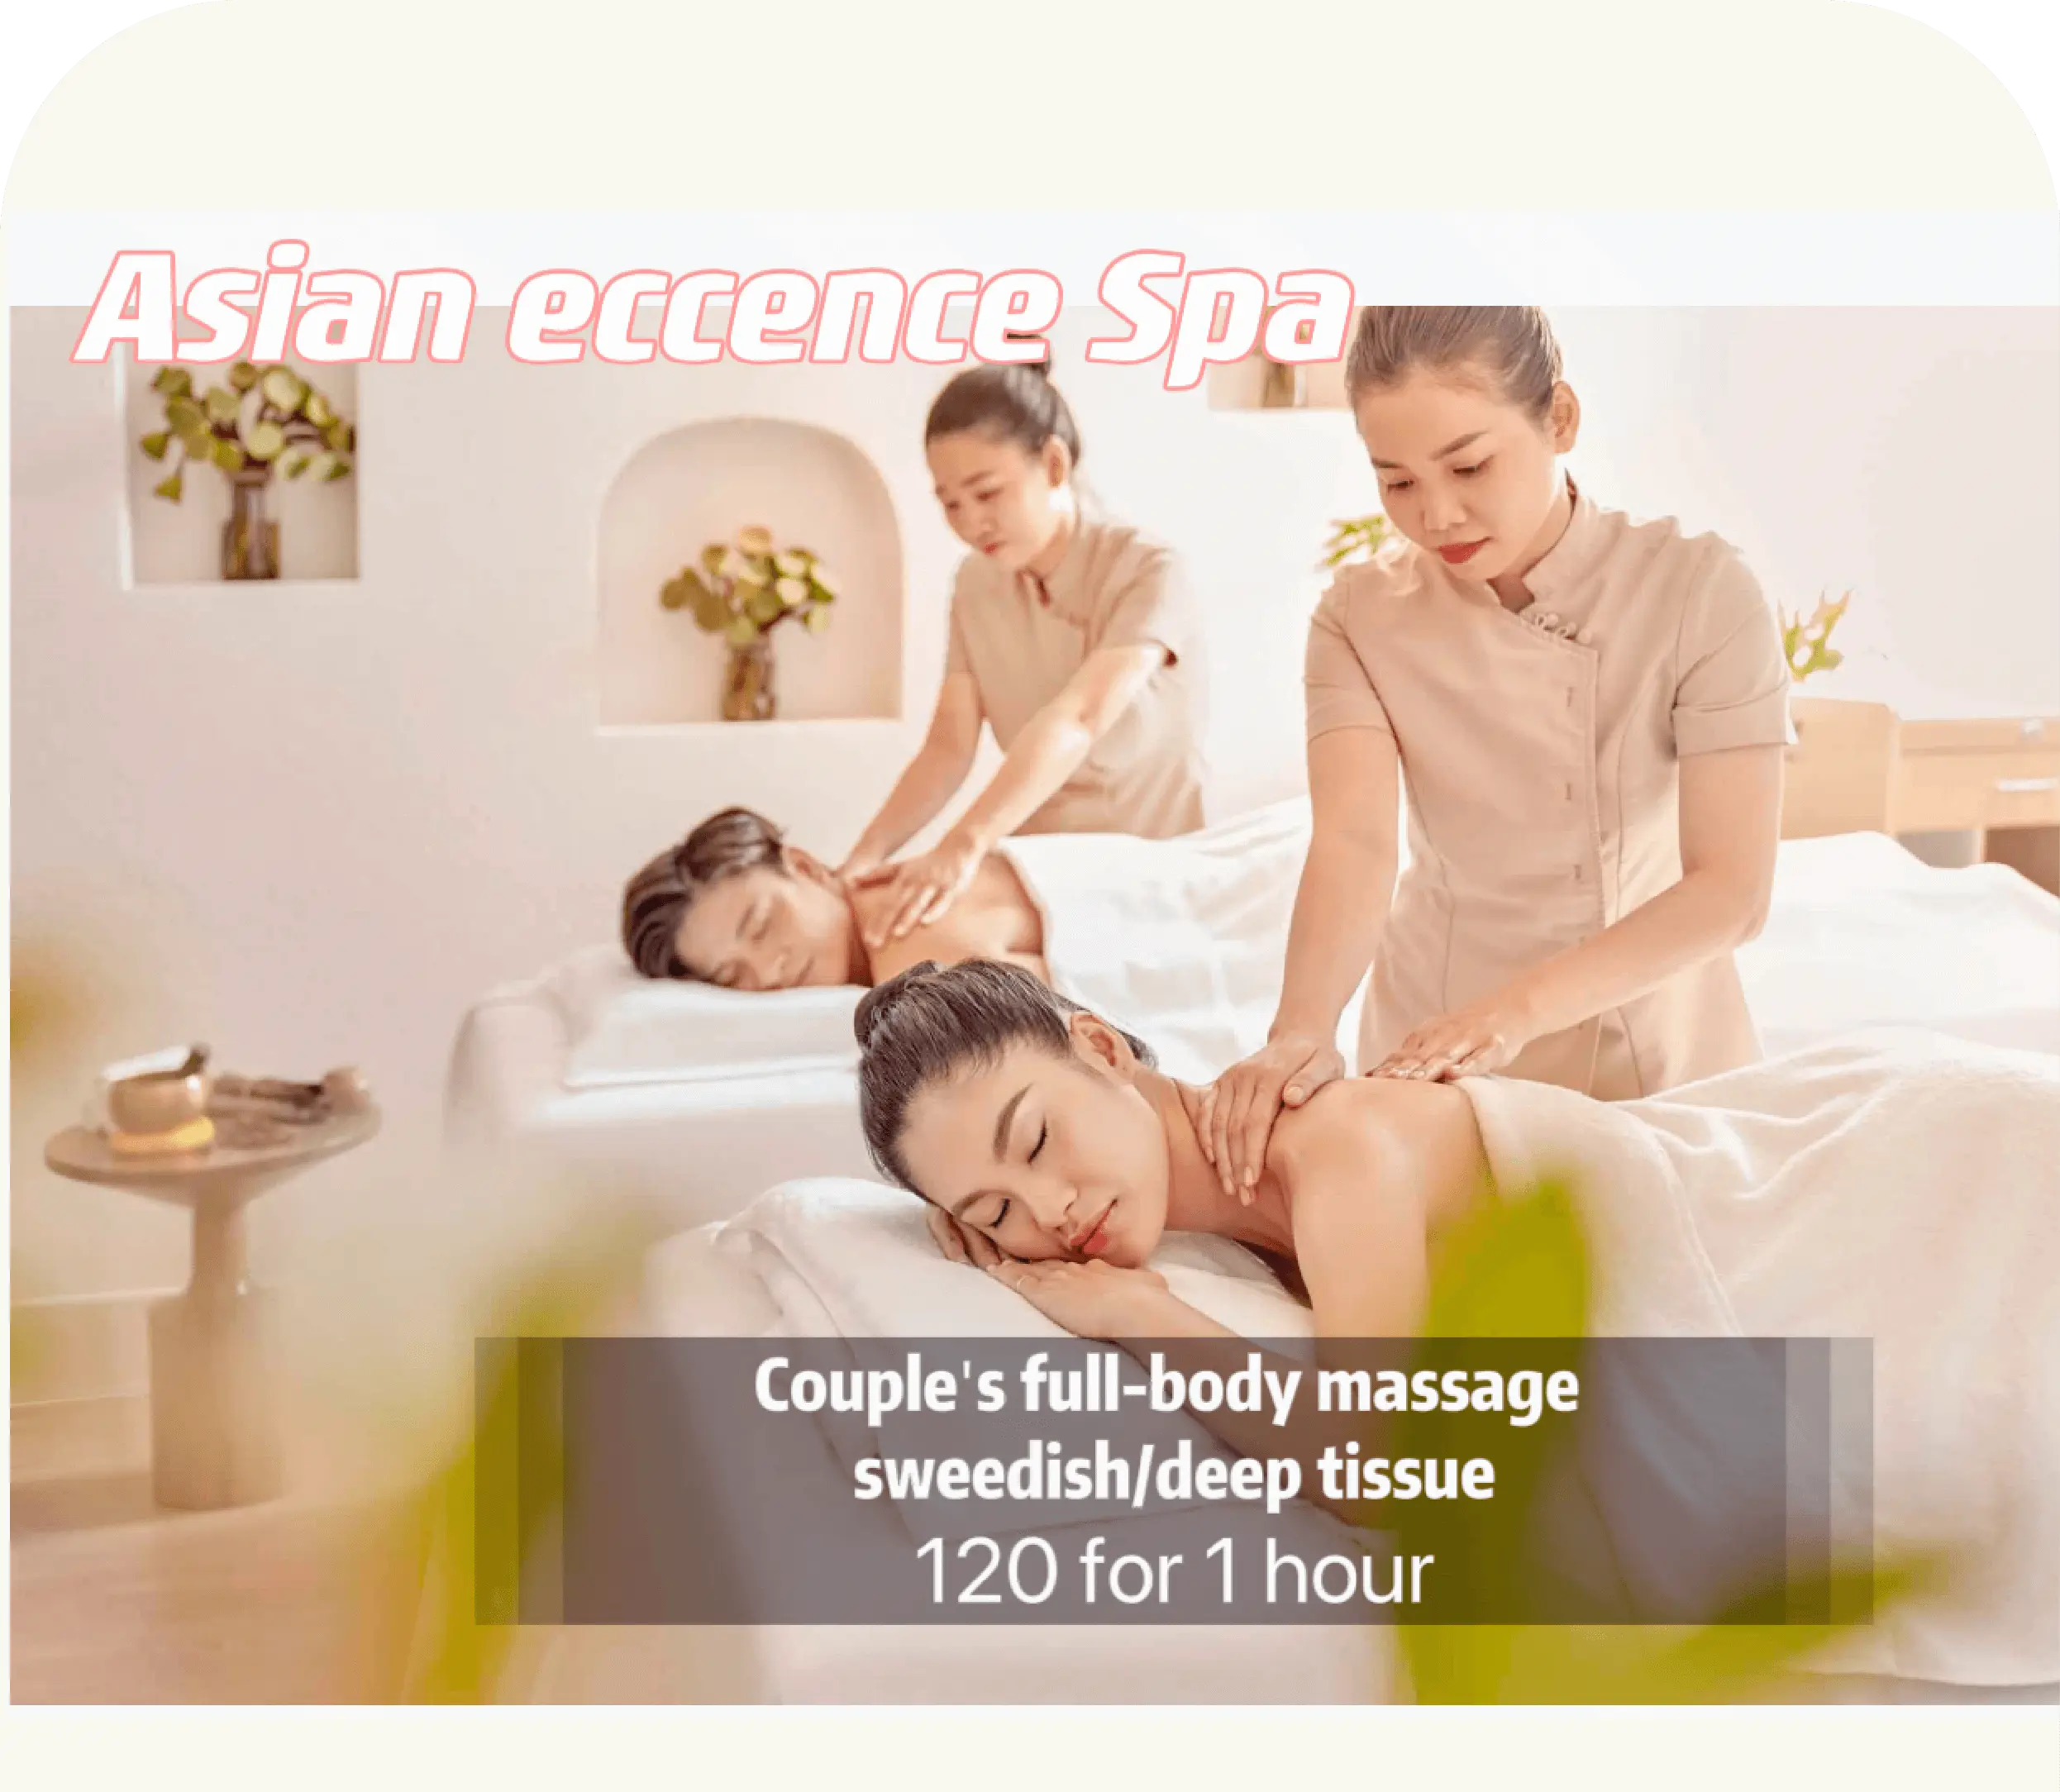 Asian spa event